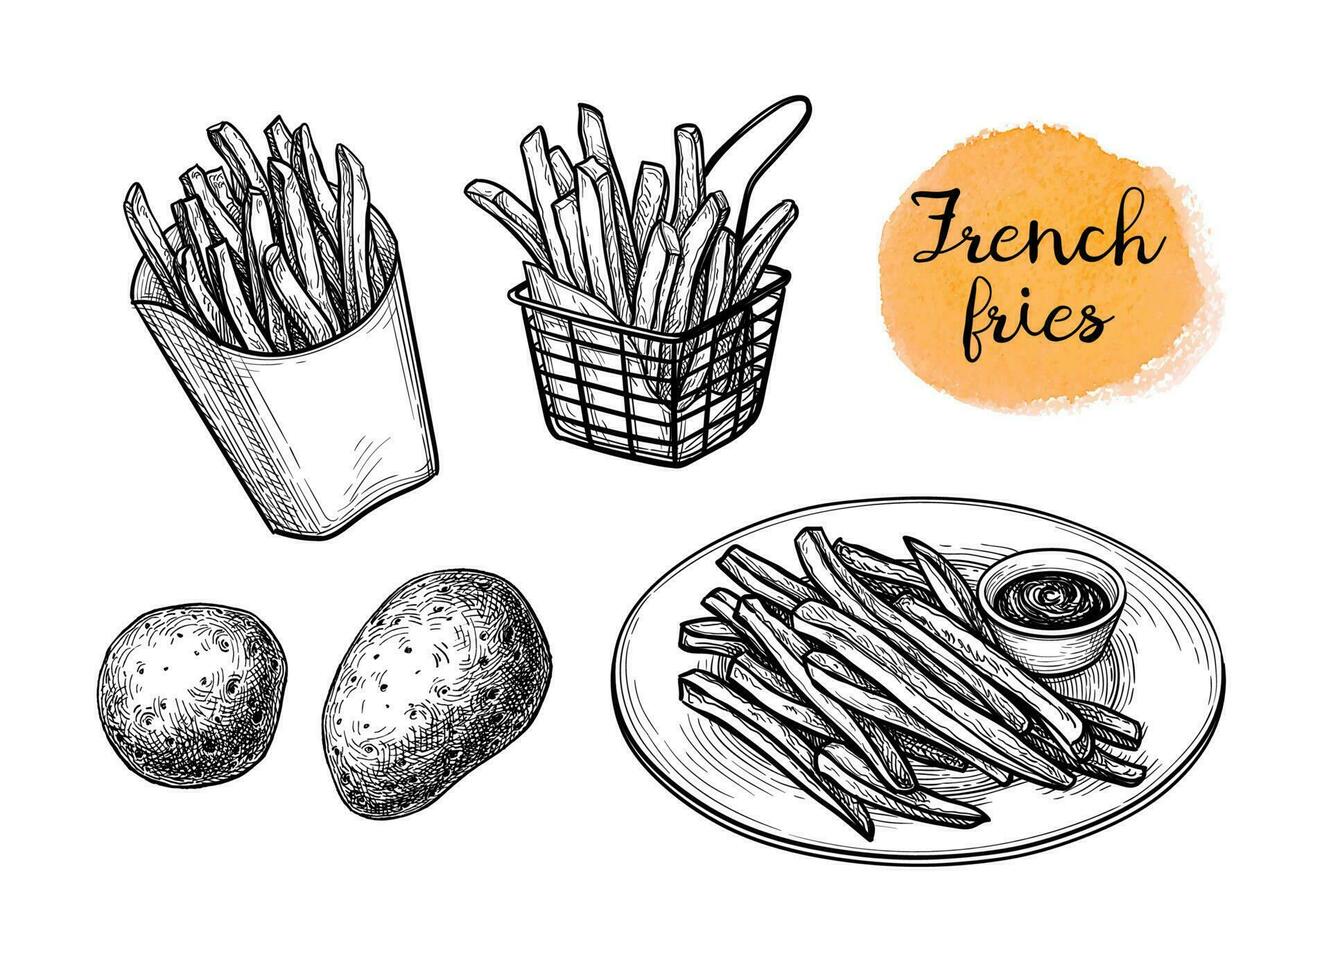 French fries. Fried potatoes. Ink sketch isolated on white background. Hand drawn vector illustration. Retro style.